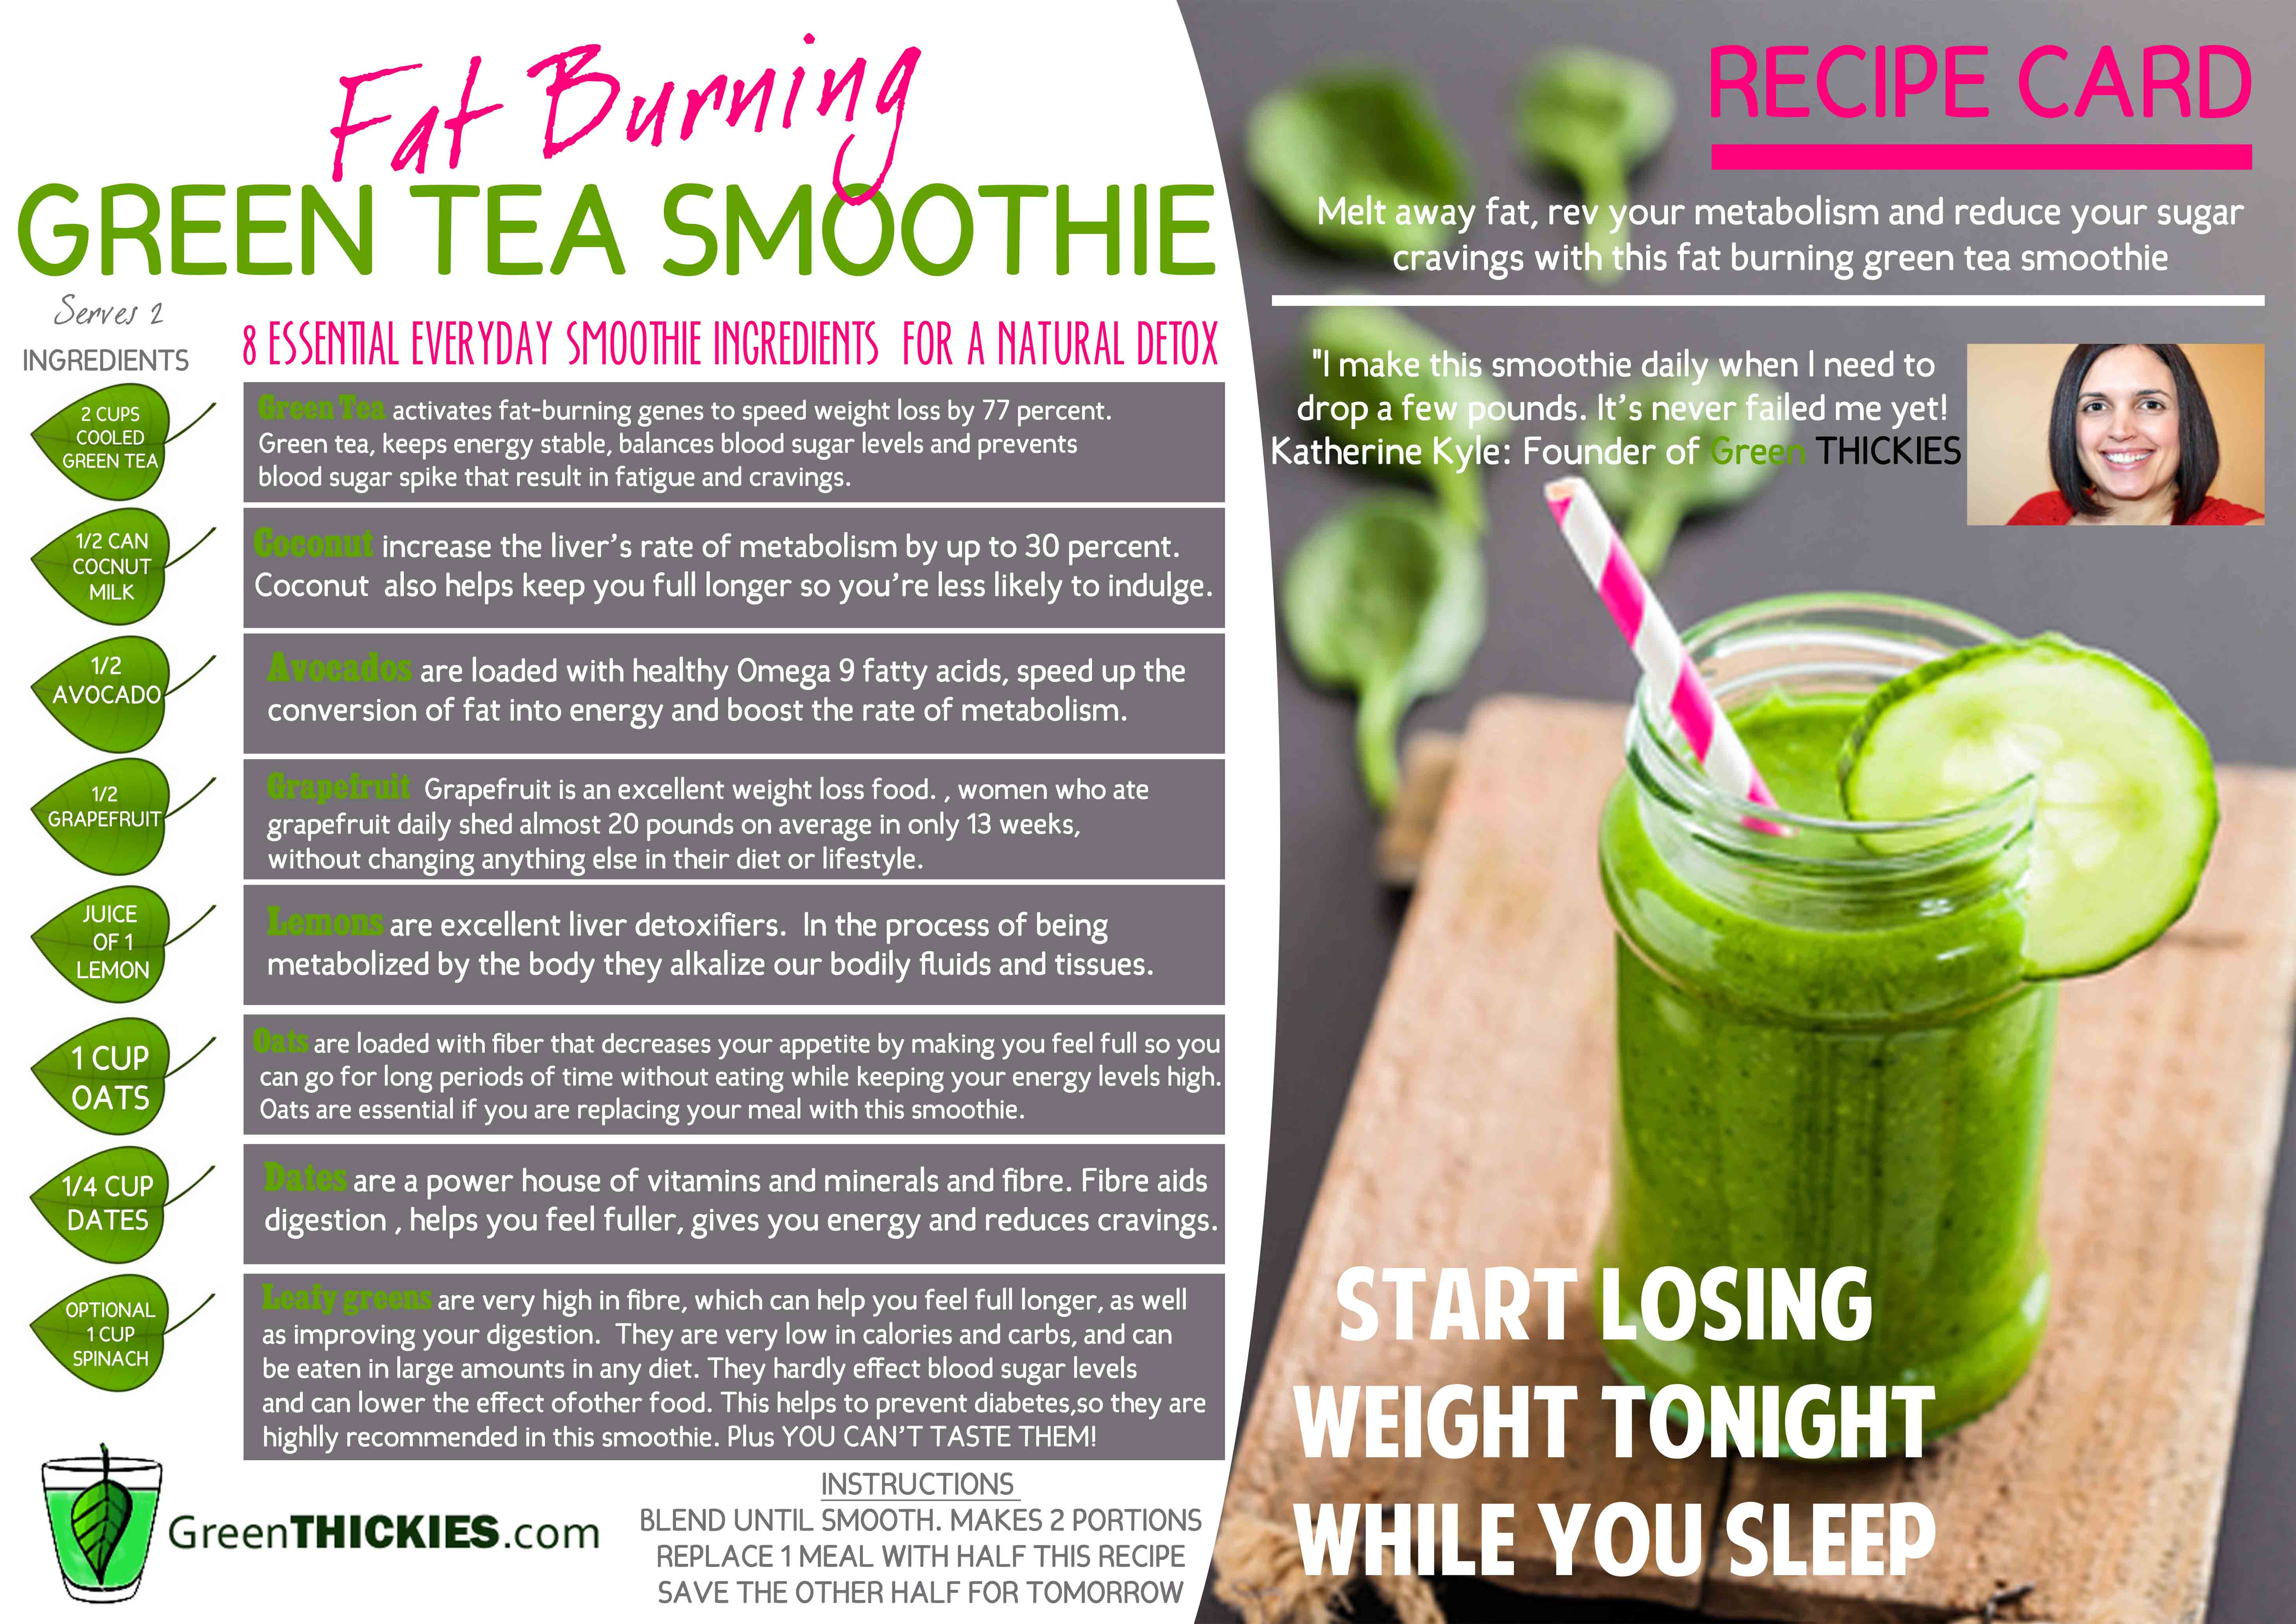 Weight Loss Recipes
 Recipe Card Download Green Thickies Filling Green